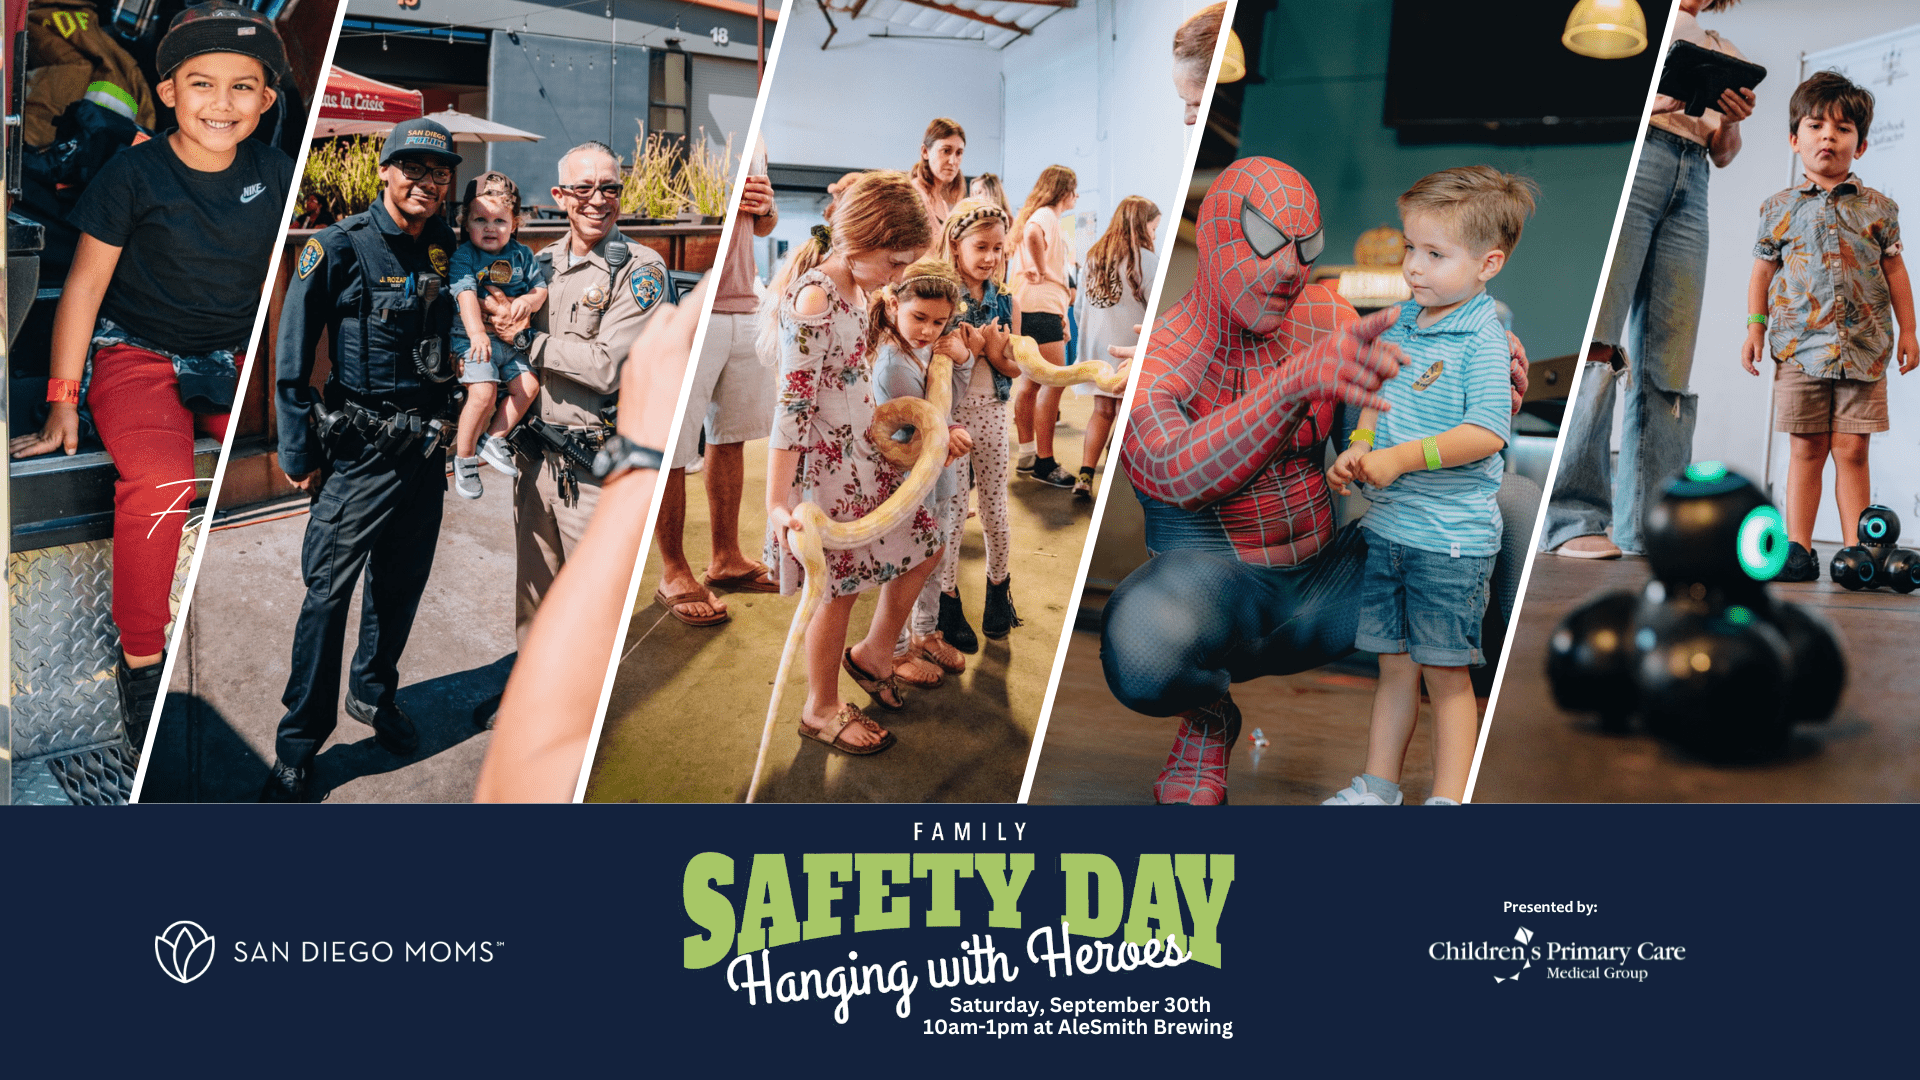 Family Safety Day Hanging with Heroes